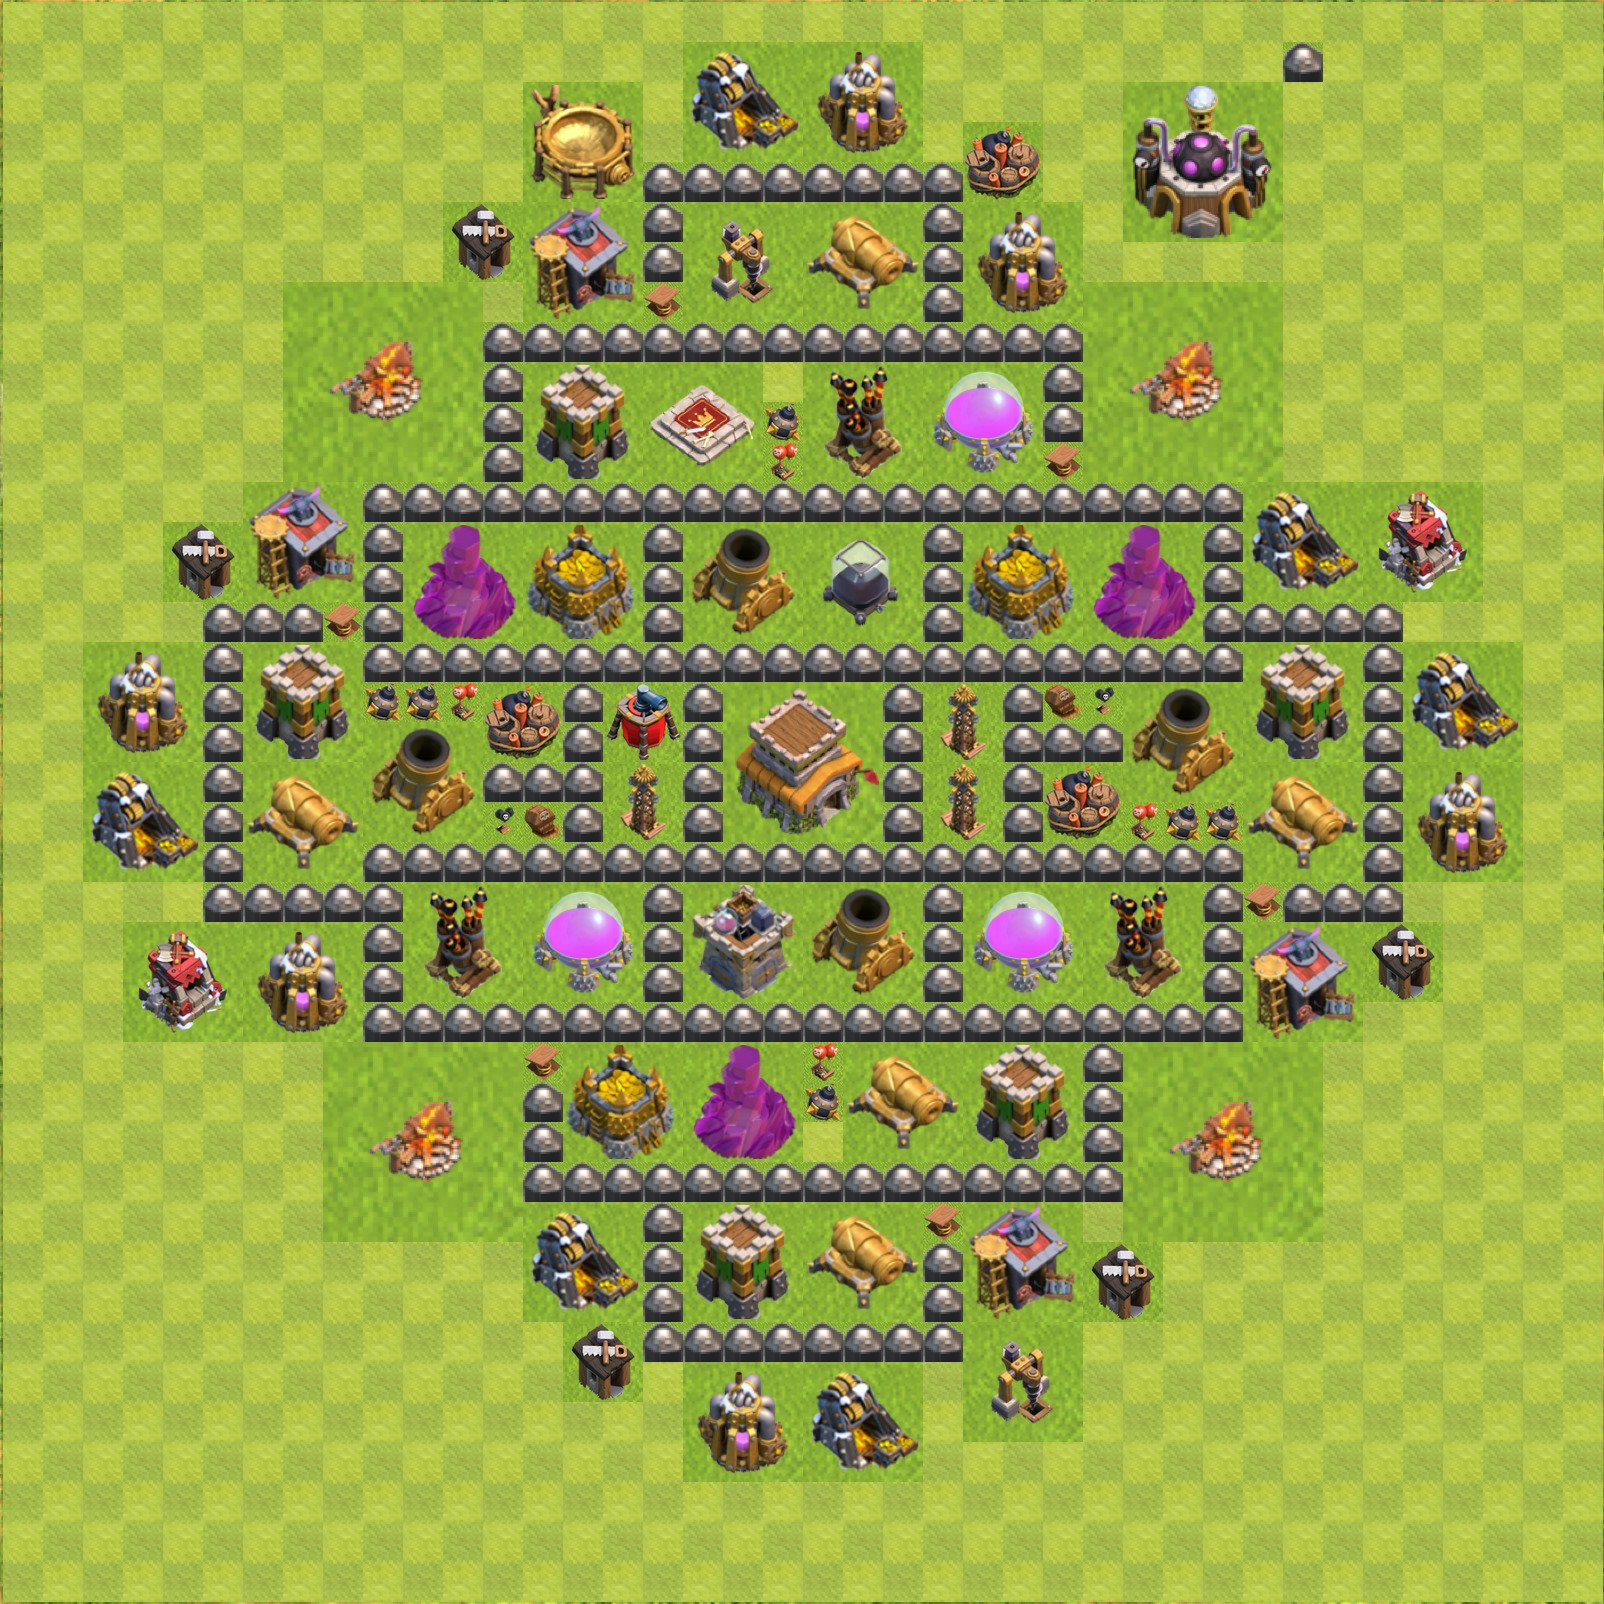 User blog:23bjs09/A level 8 town hall defense, Clash of Clans Wiki